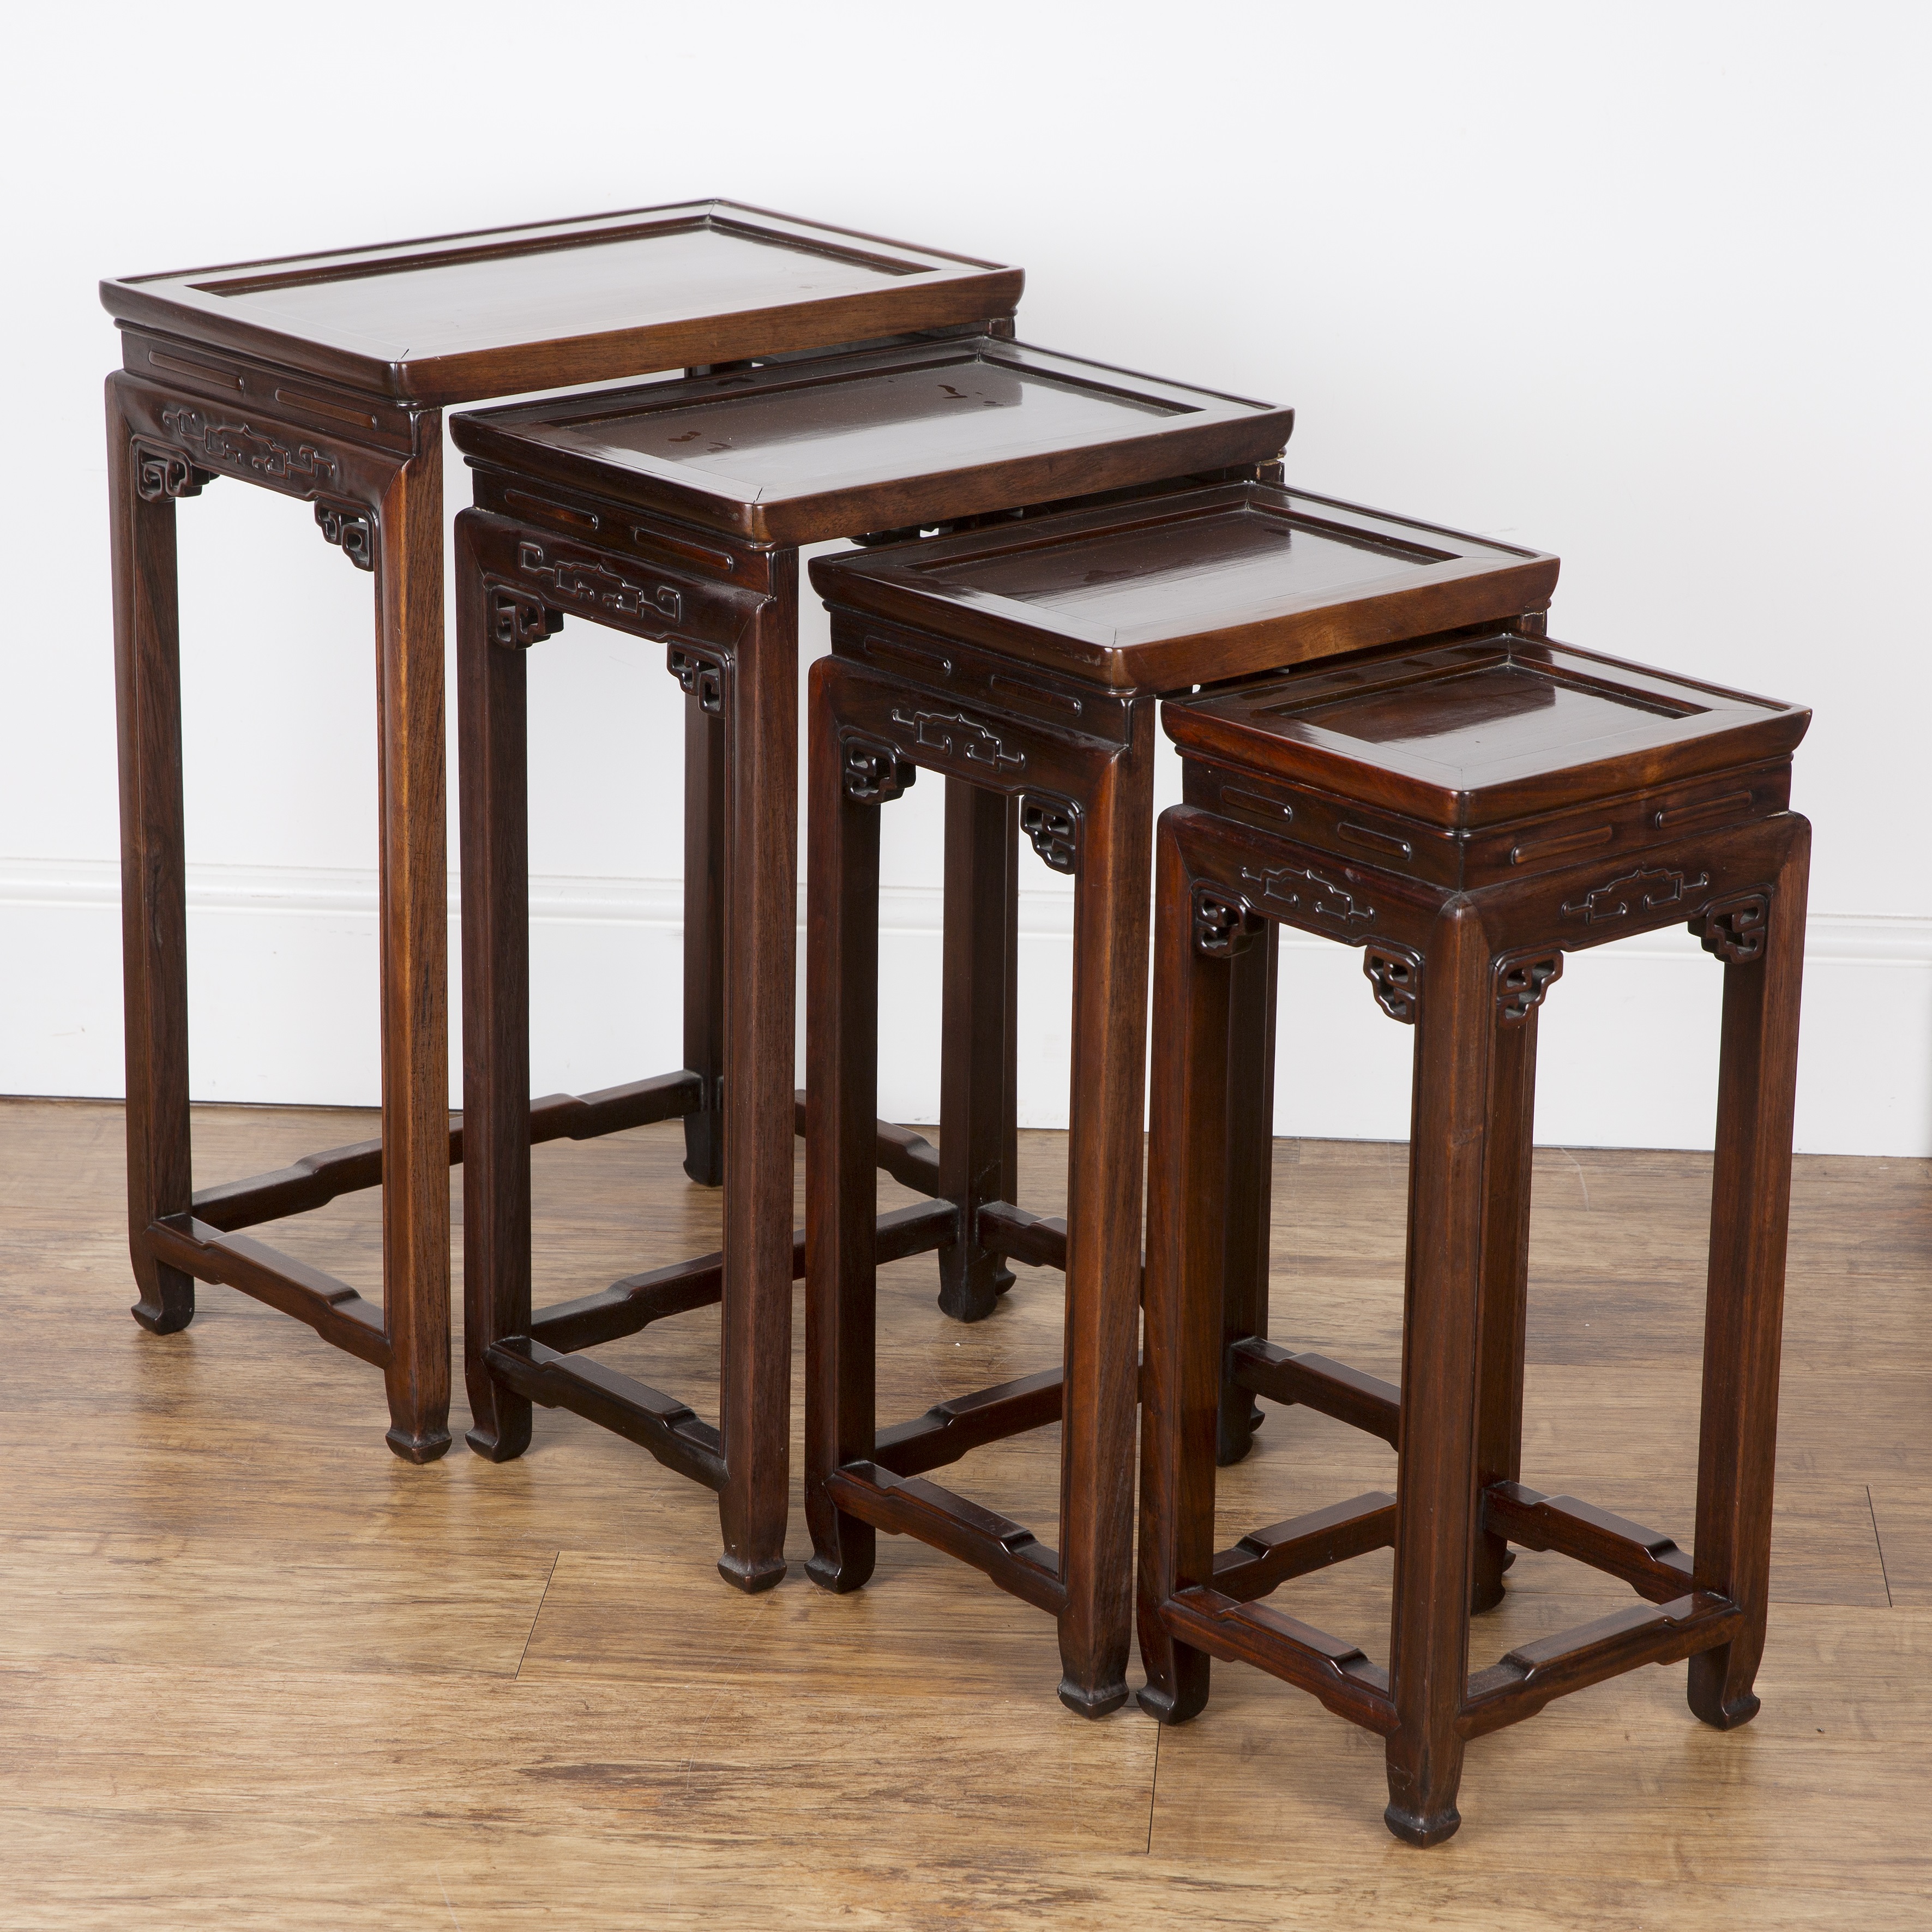 Hongmu quartetto of occasional tables Chinese, early 20th Century comprising of a Ming style smaller